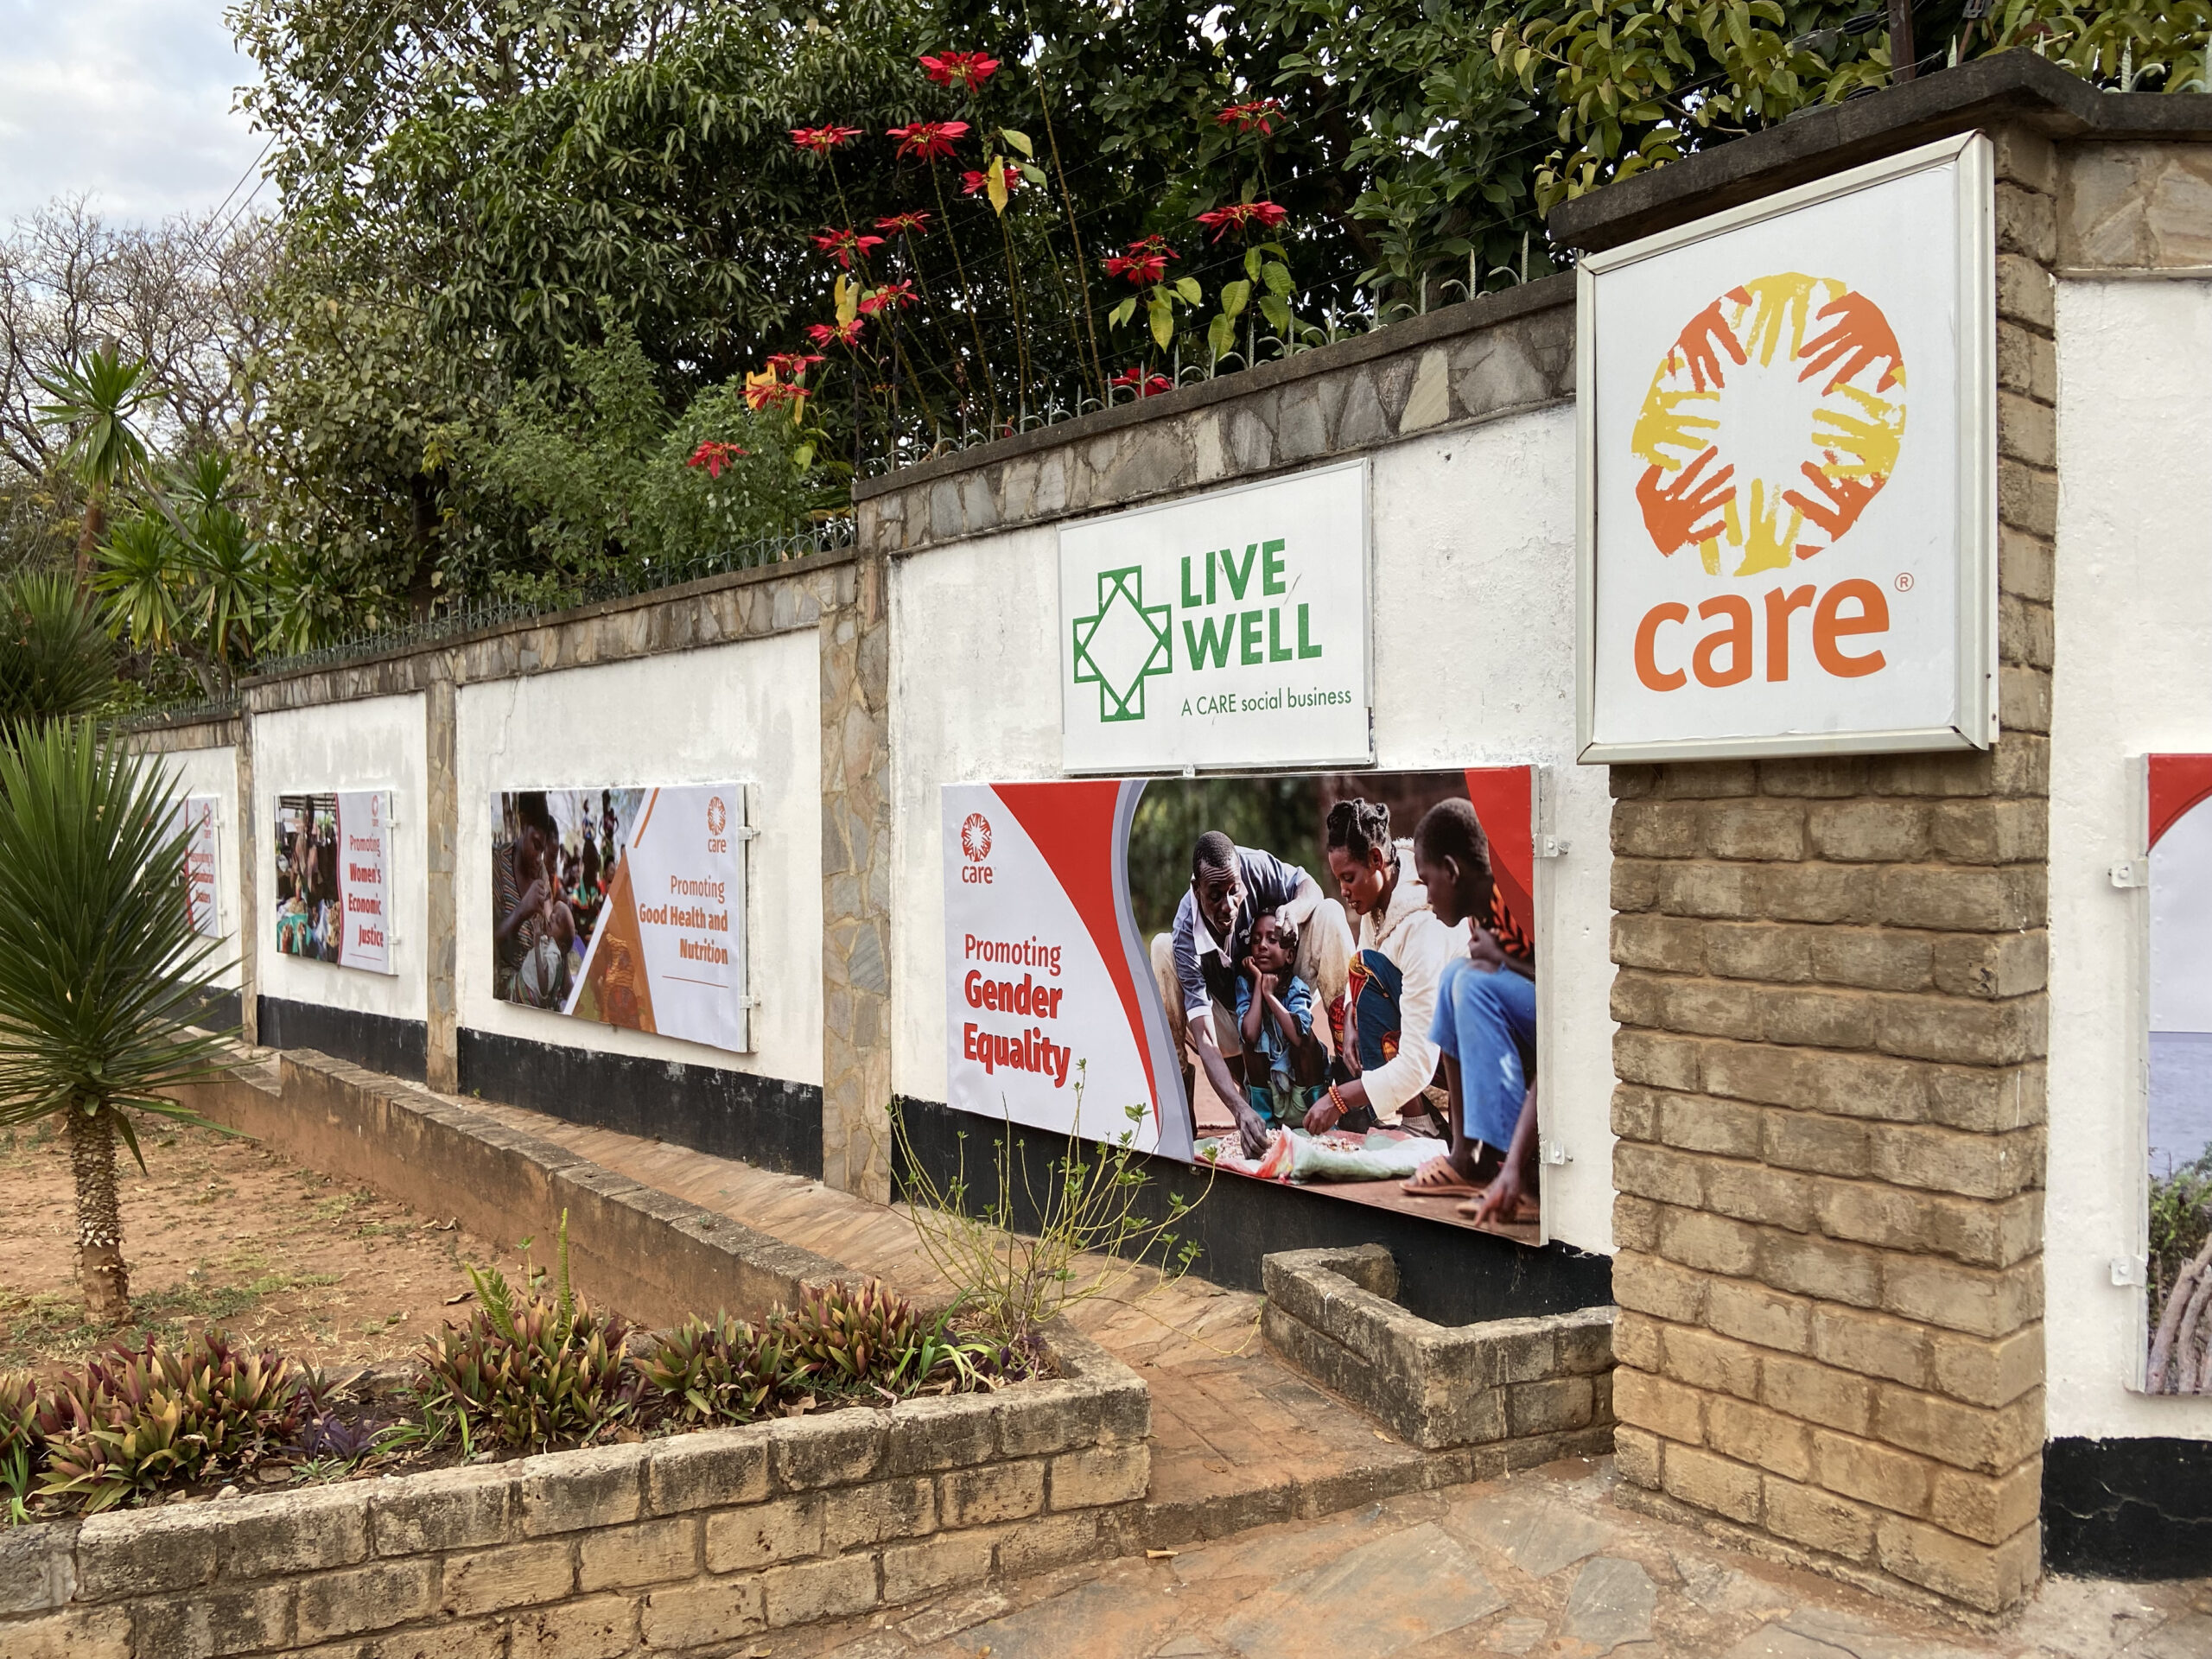 Outside the CARE office in Zambia.